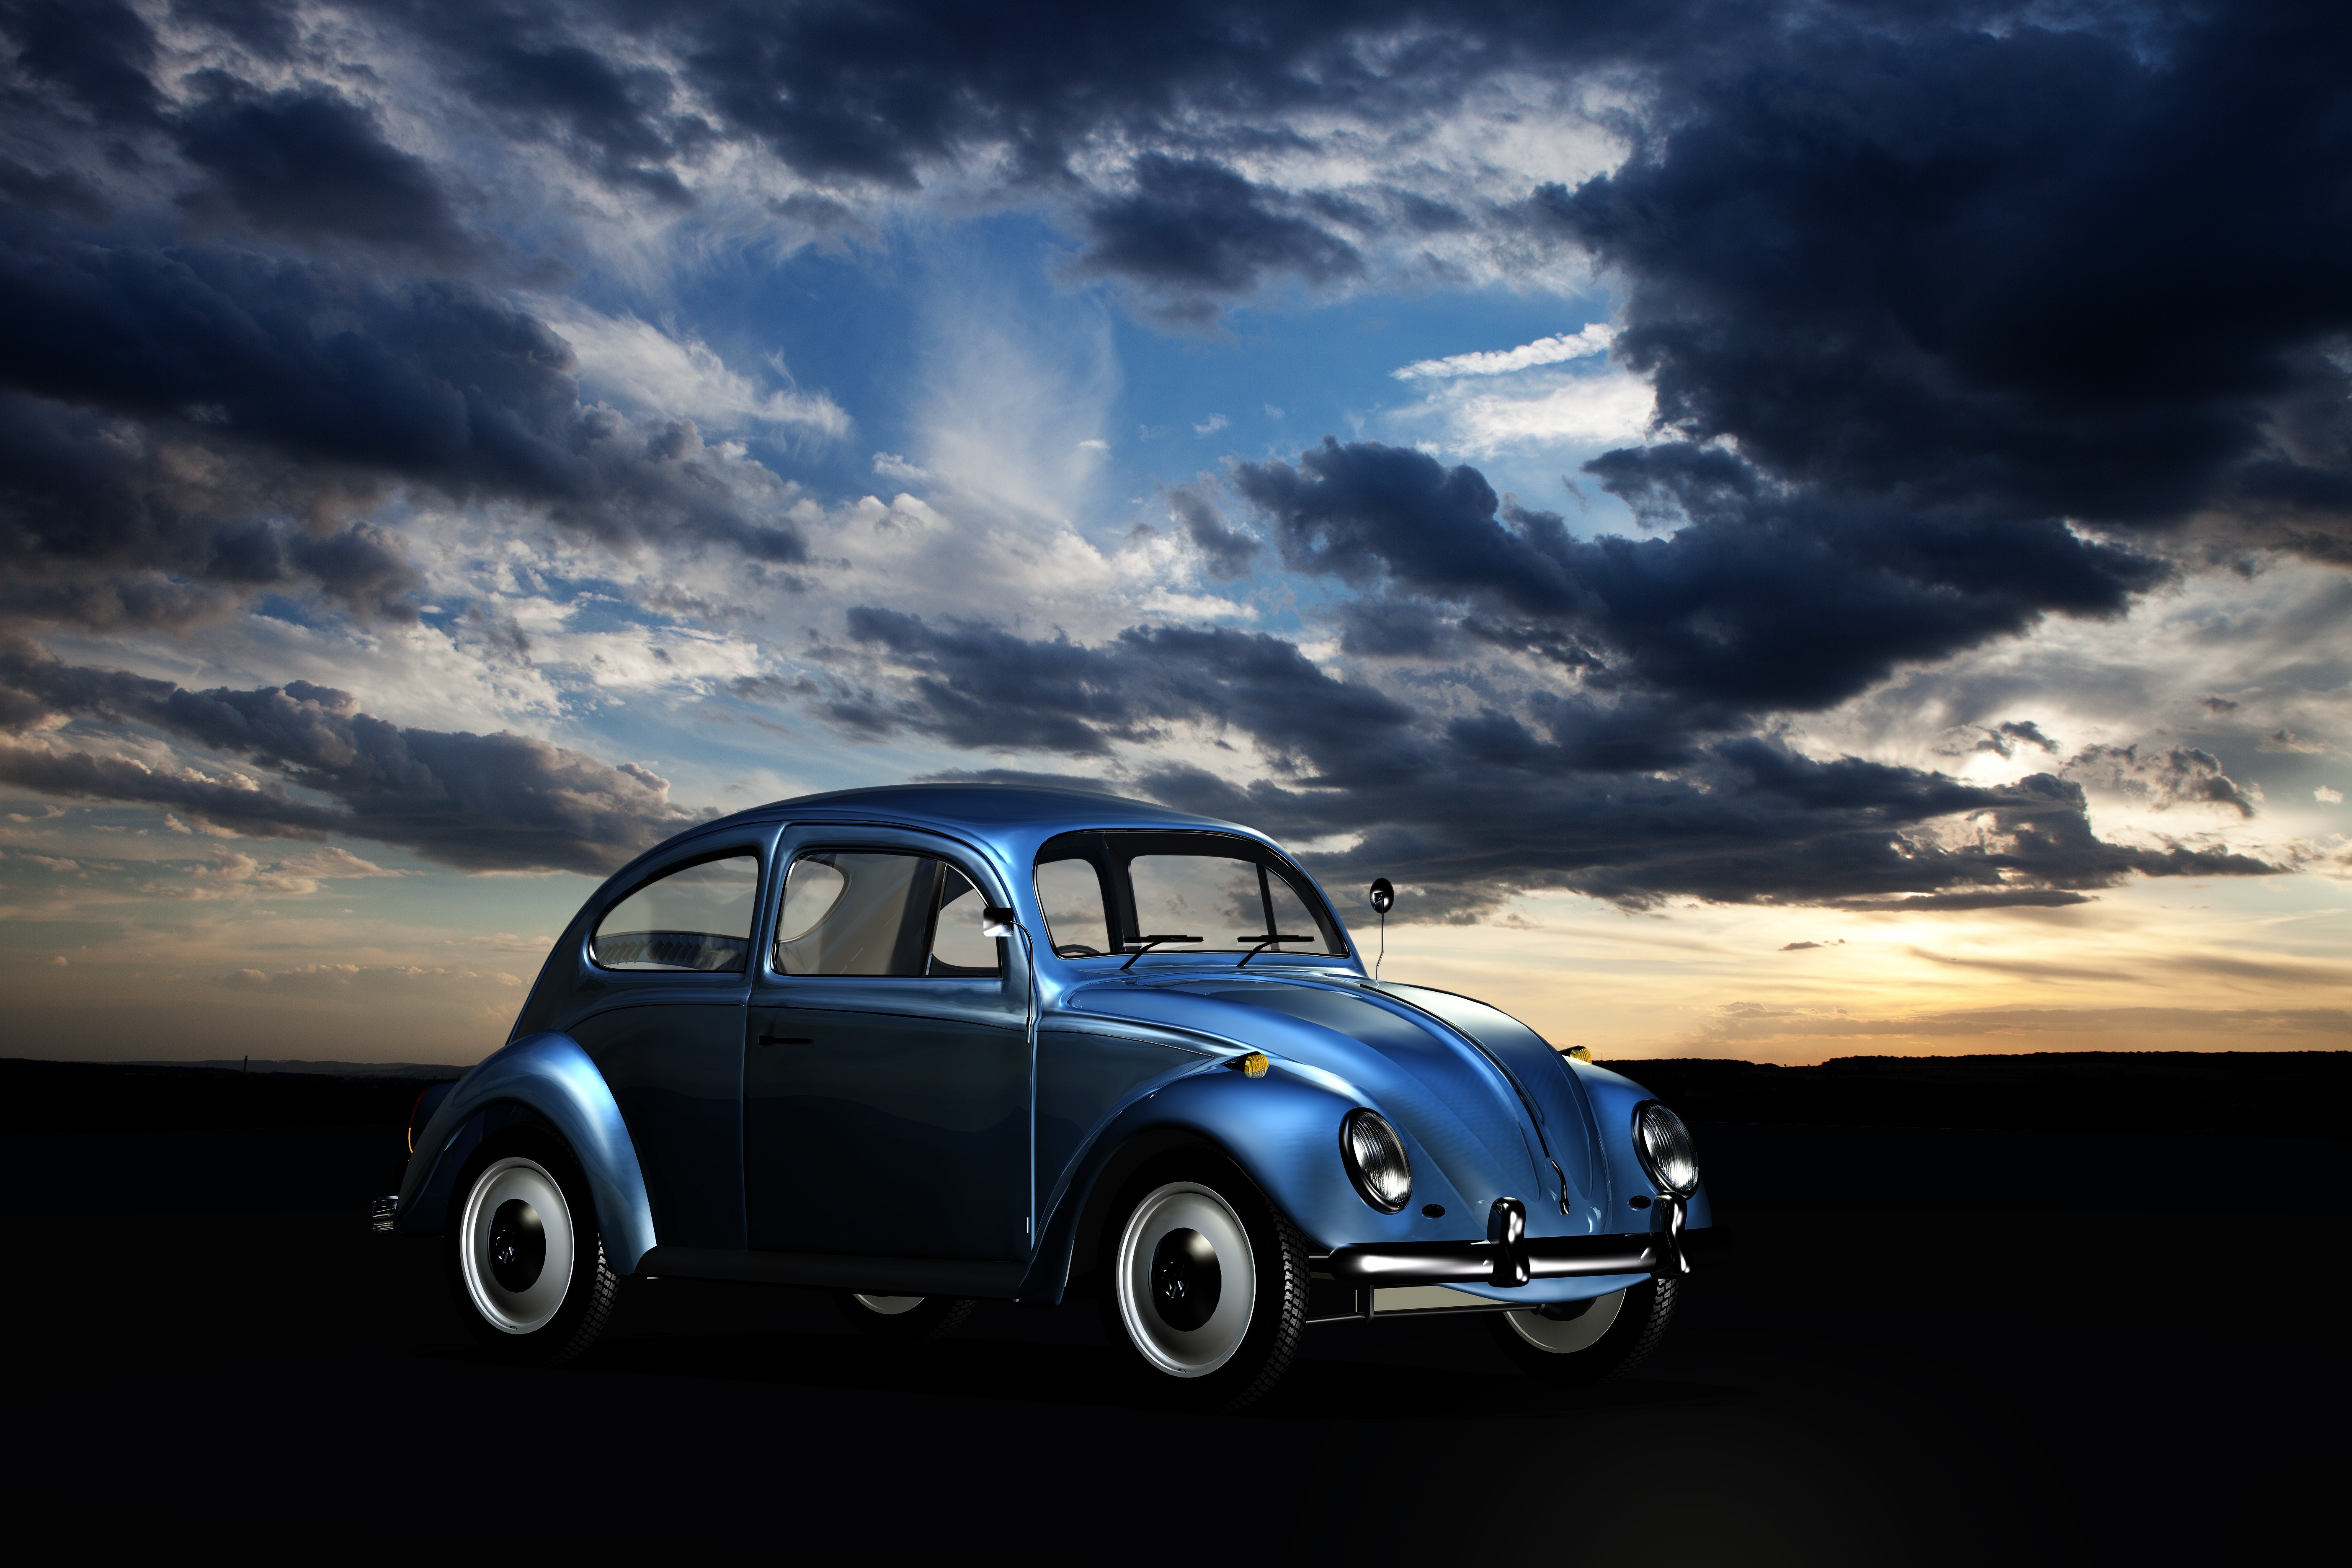 Blue volkswagen beetle under blue sky and white clouds during golden hour photo